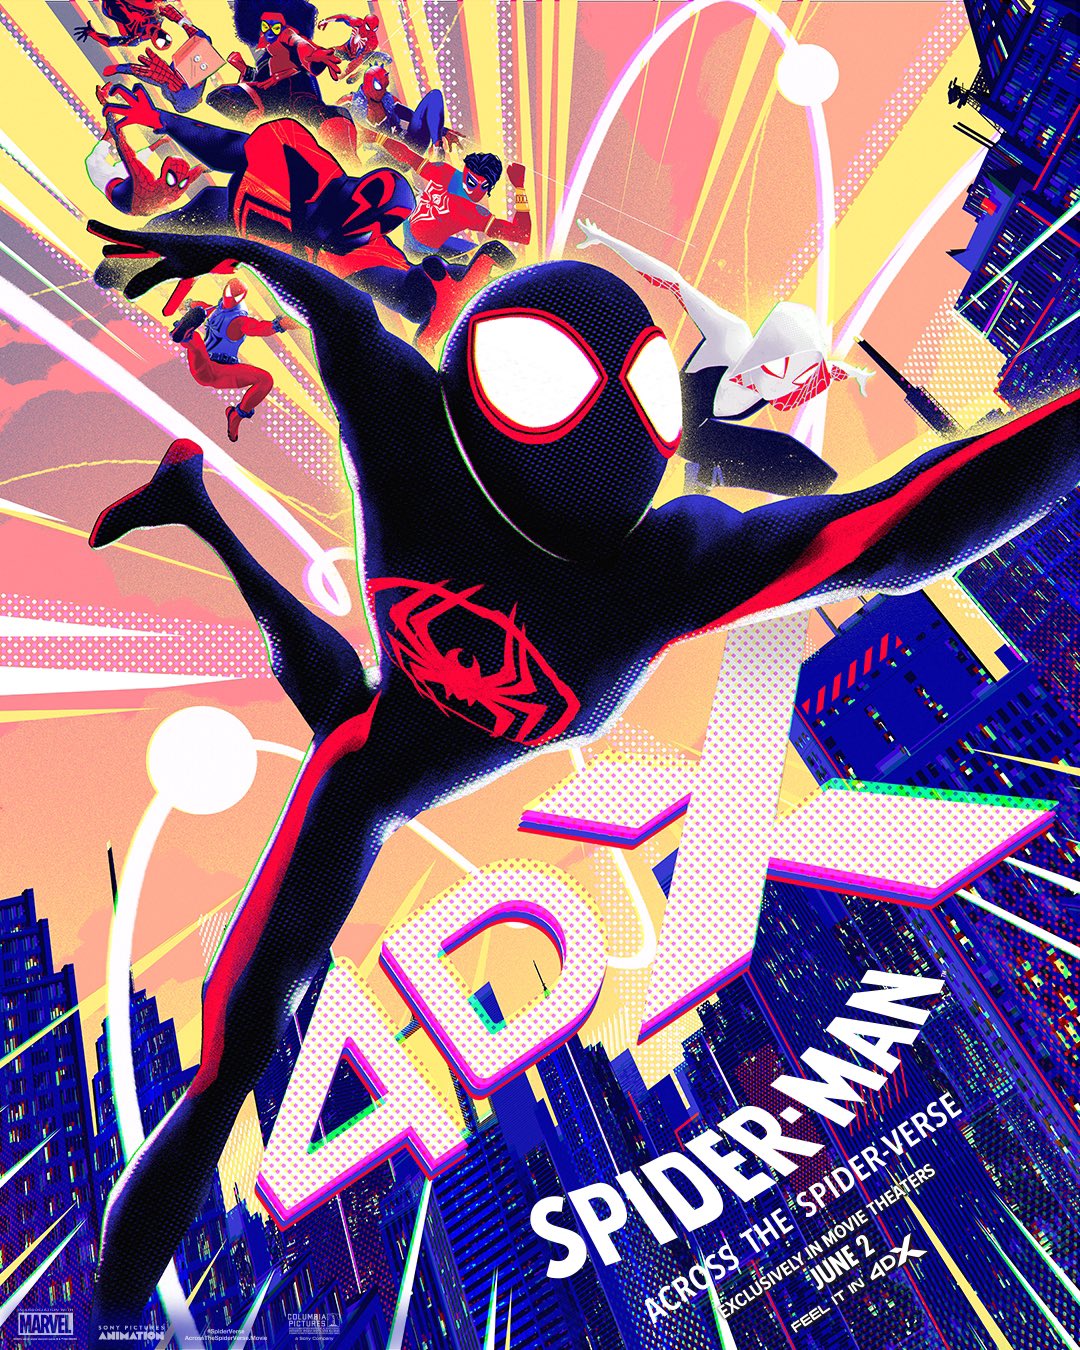 Artwork by Sony Pictures – Spider-Man: Across The Spider Verse